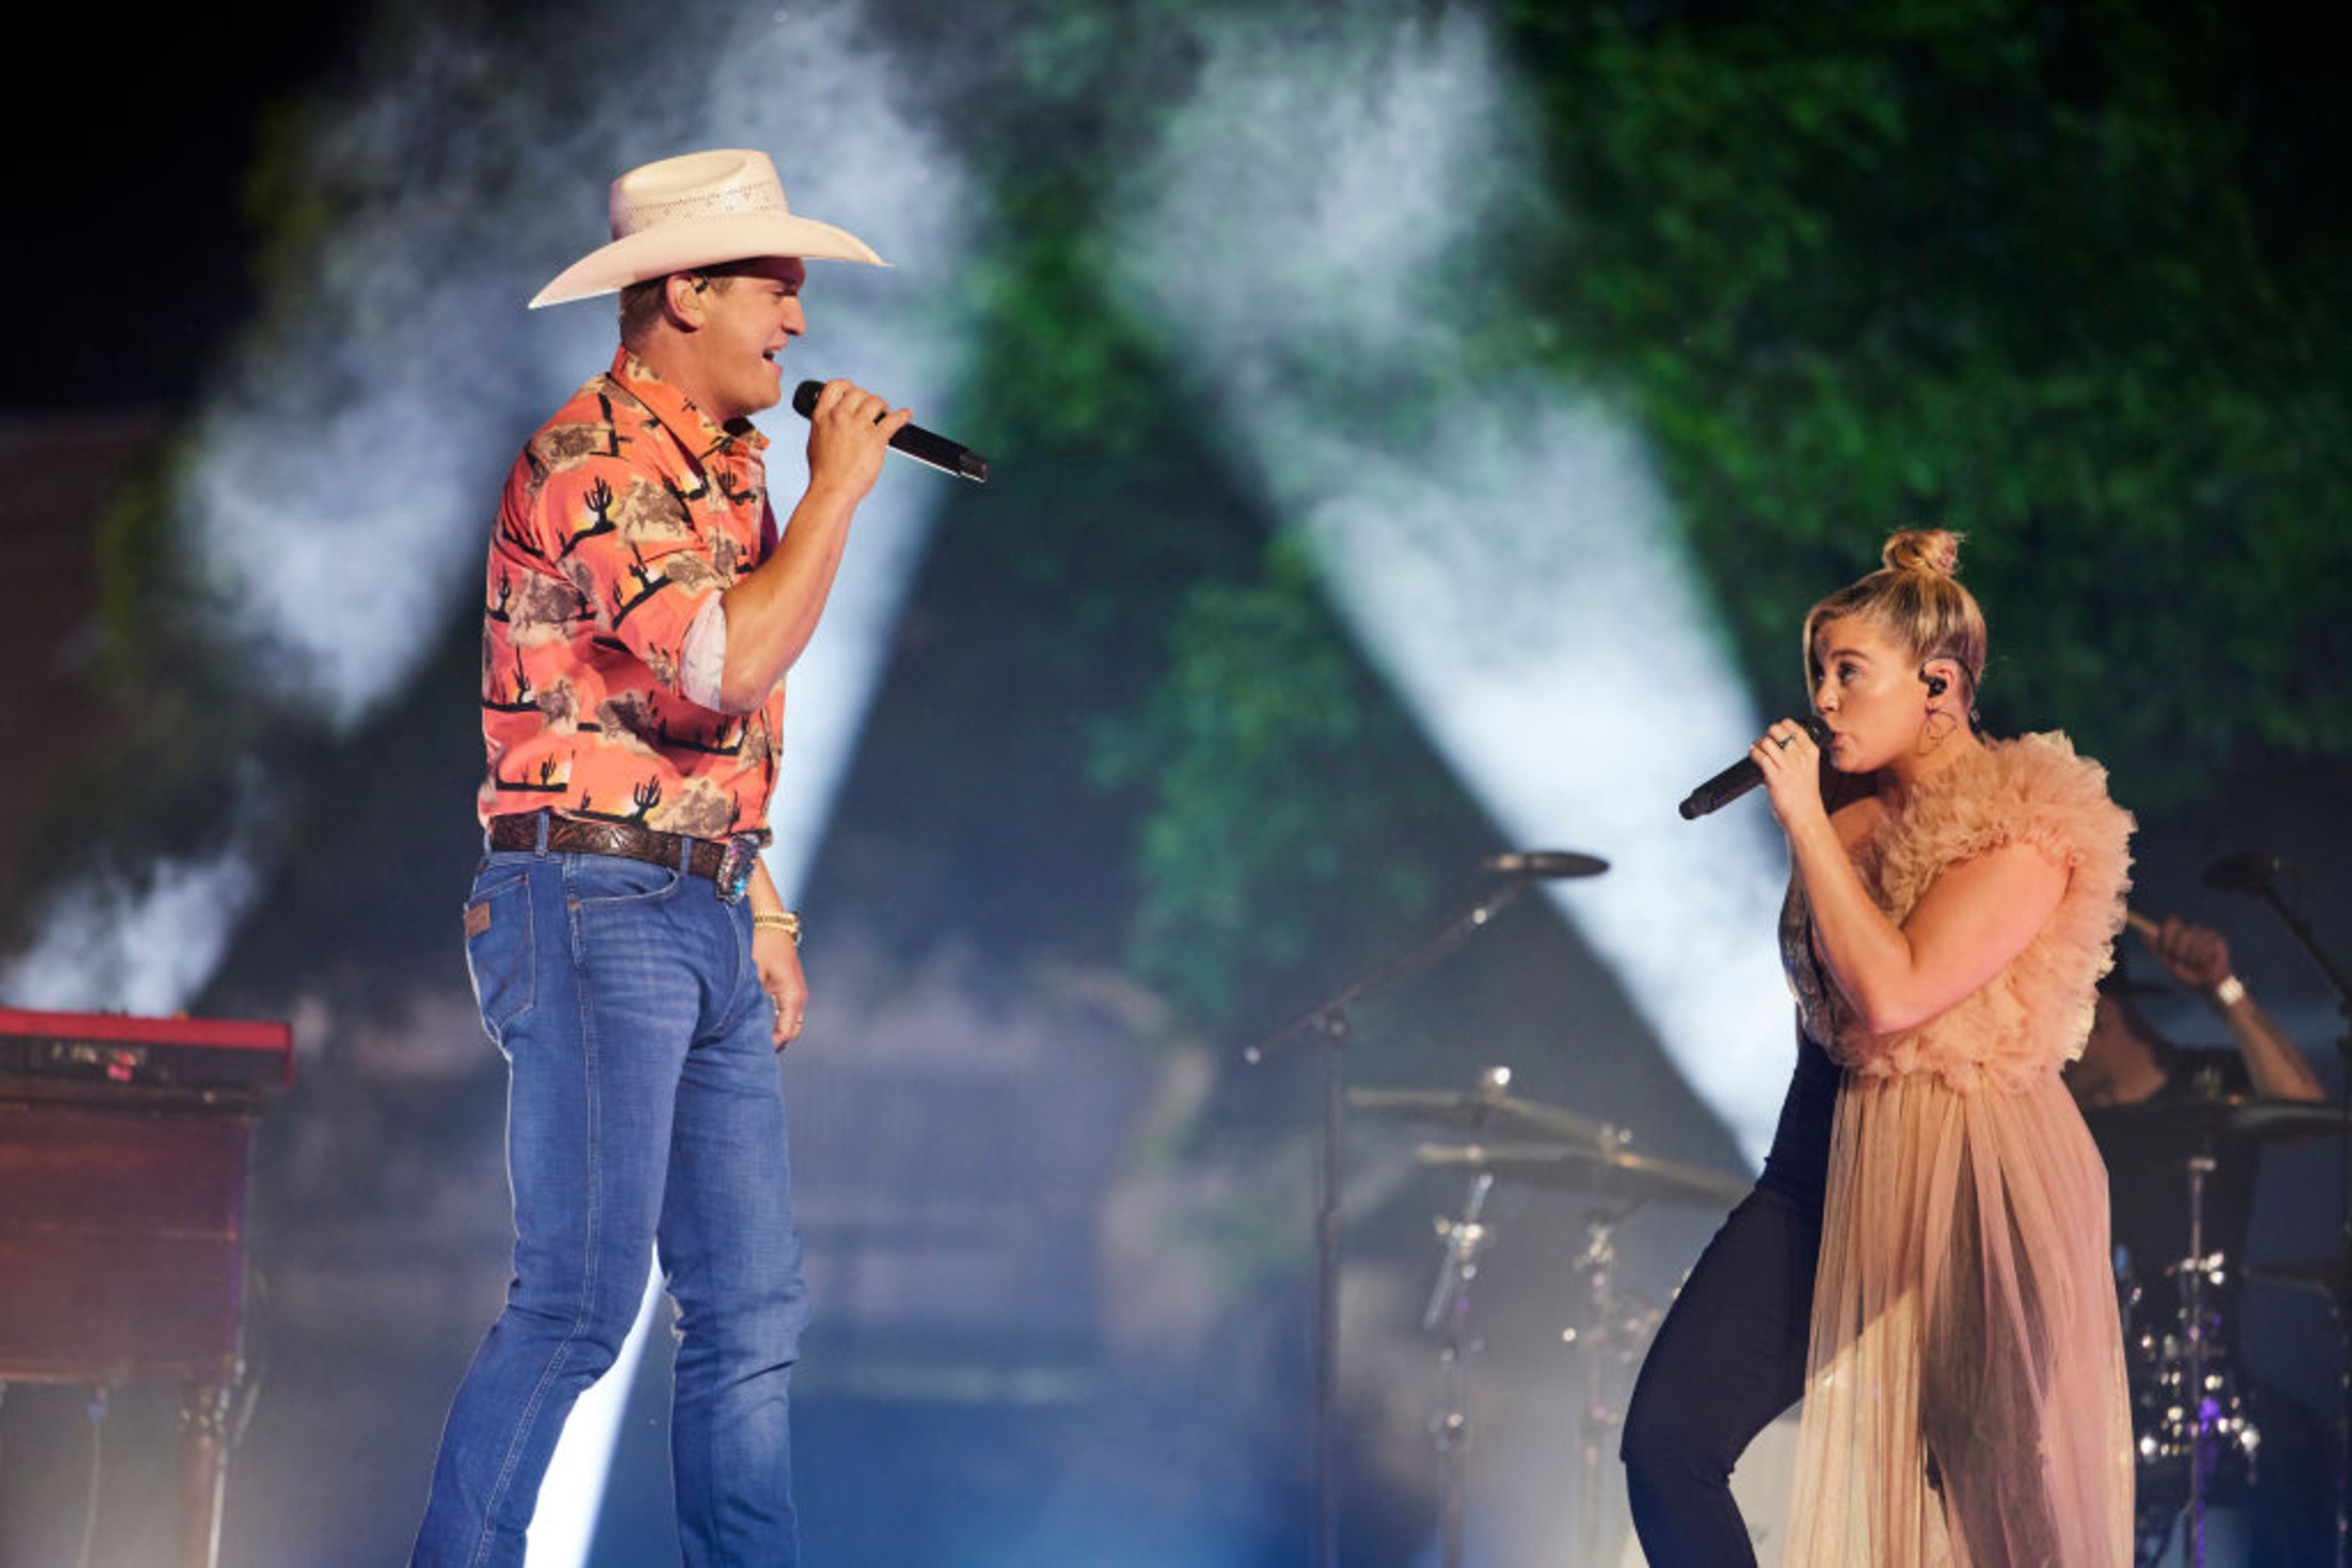 <p>Even though it wasn't a massive hit, Jon Pardi and Lauren Alaina's "Don't Blame it on the Whiskey" had a pair of major superstars behind its lyrics: Eric Church and Miranda Lambert were among the song's writers. </p><p>You may also like: <a href='https://www.yardbarker.com/entertainment/articles/two_part_harmony_the_best_musical_couples_of_all_time/s1__39242062'>Two-part harmony: The best musical couples of all time</a></p>